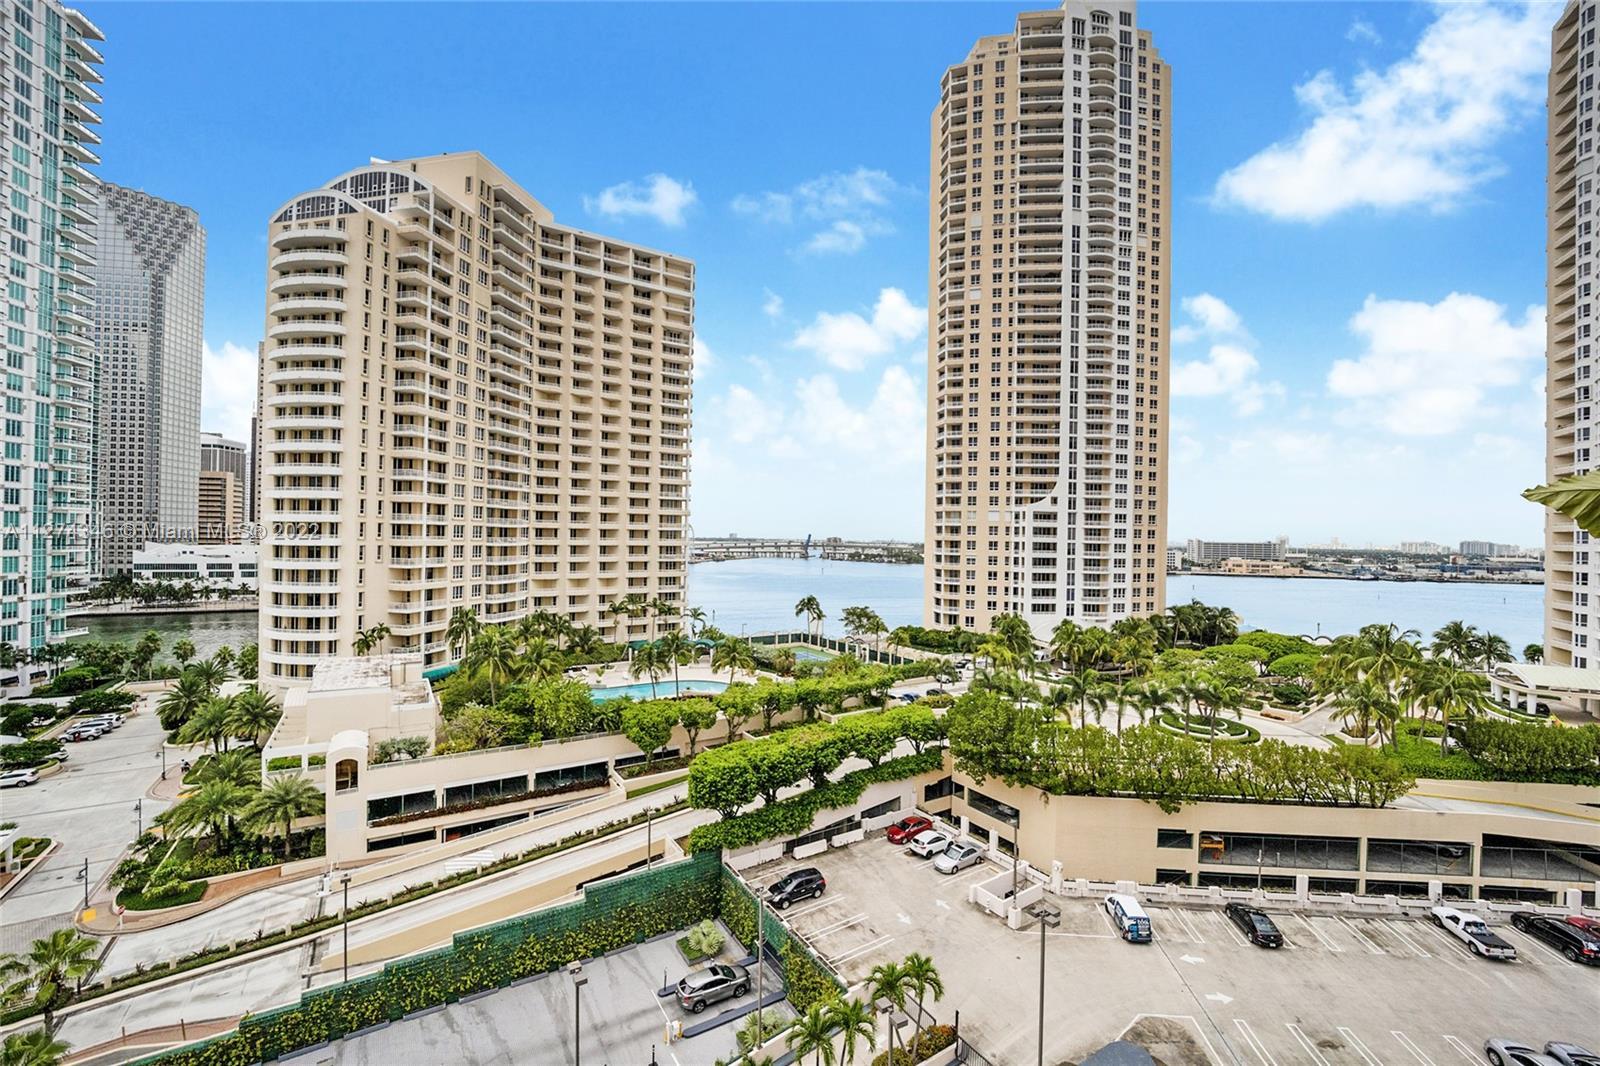 Gorgeous bay view from this corner unit 3-bedroom 3 bath located in Brickell Key, an exclusive islan